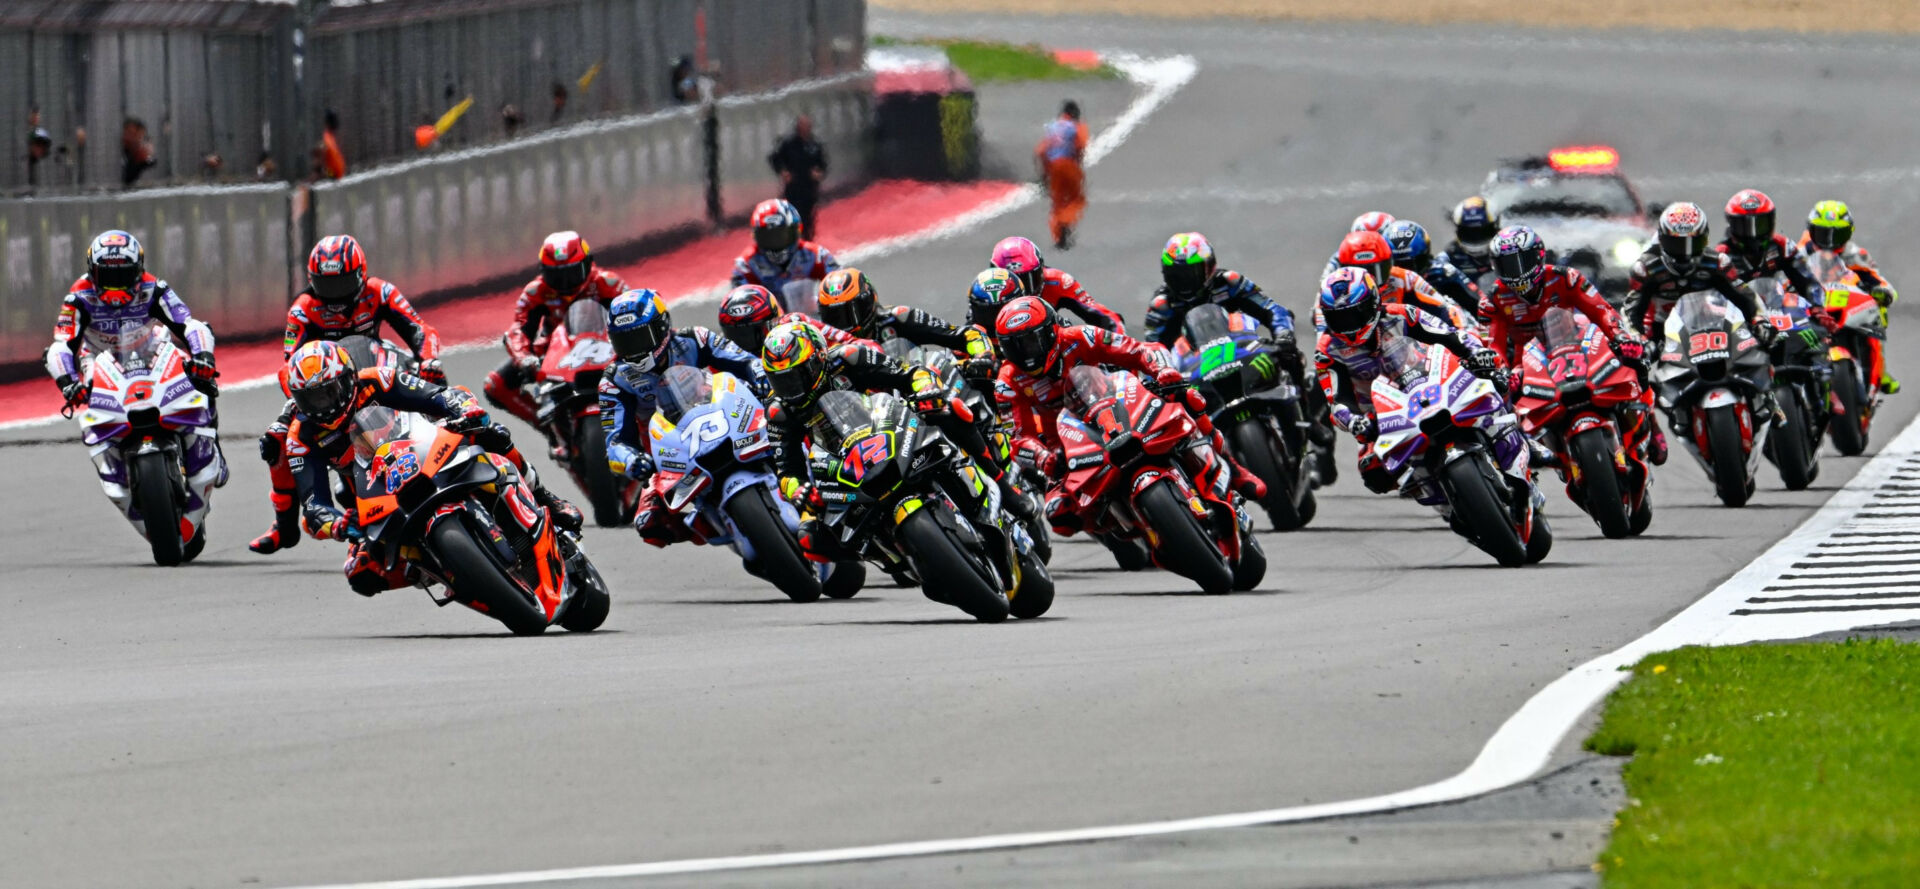 The start of the MotoGP race at Silverstone with Marco Bezzecchi (72) and Jack Miller (43) contesting the lead. Photo courtesy Dorna.